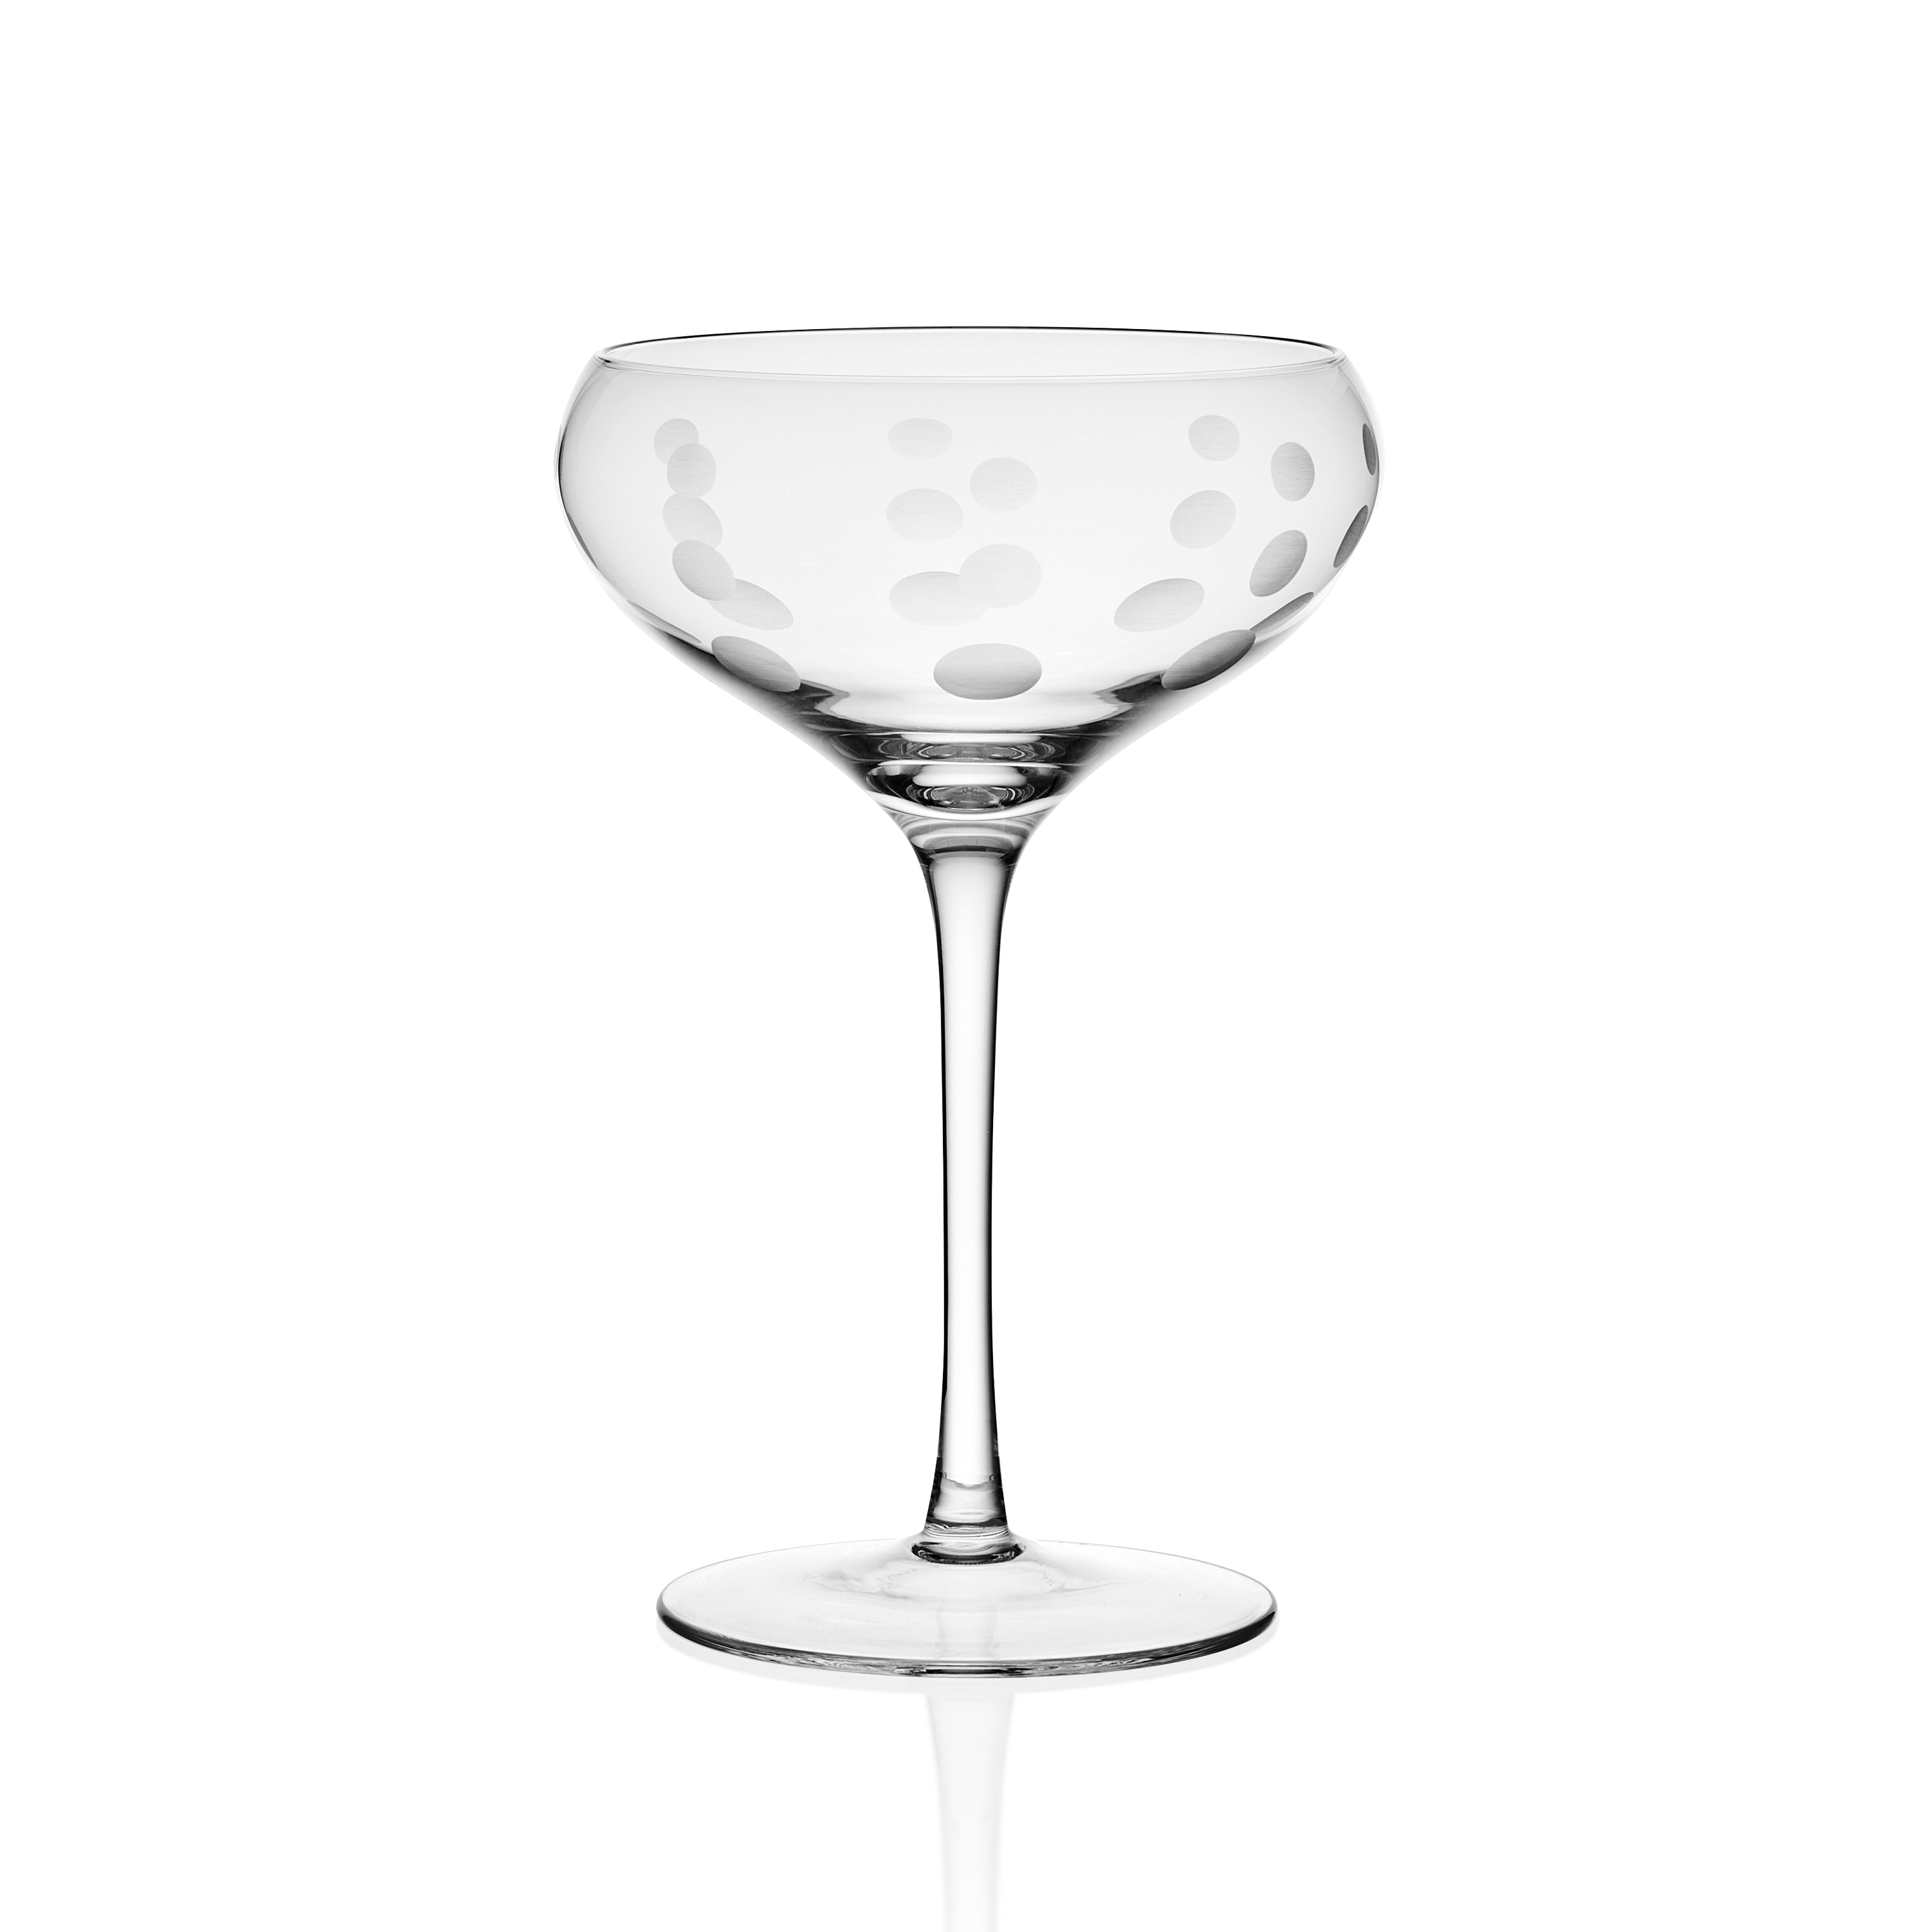 https://ak1.ostkcdn.com/images/products/is/images/direct/ae4c9a30c90854ff8cfcb8573f18486ceb75ae18/Mikasa-Cheers-15OZ-Coupe-Cocktail-Glass%2C-Set-of-4.jpg